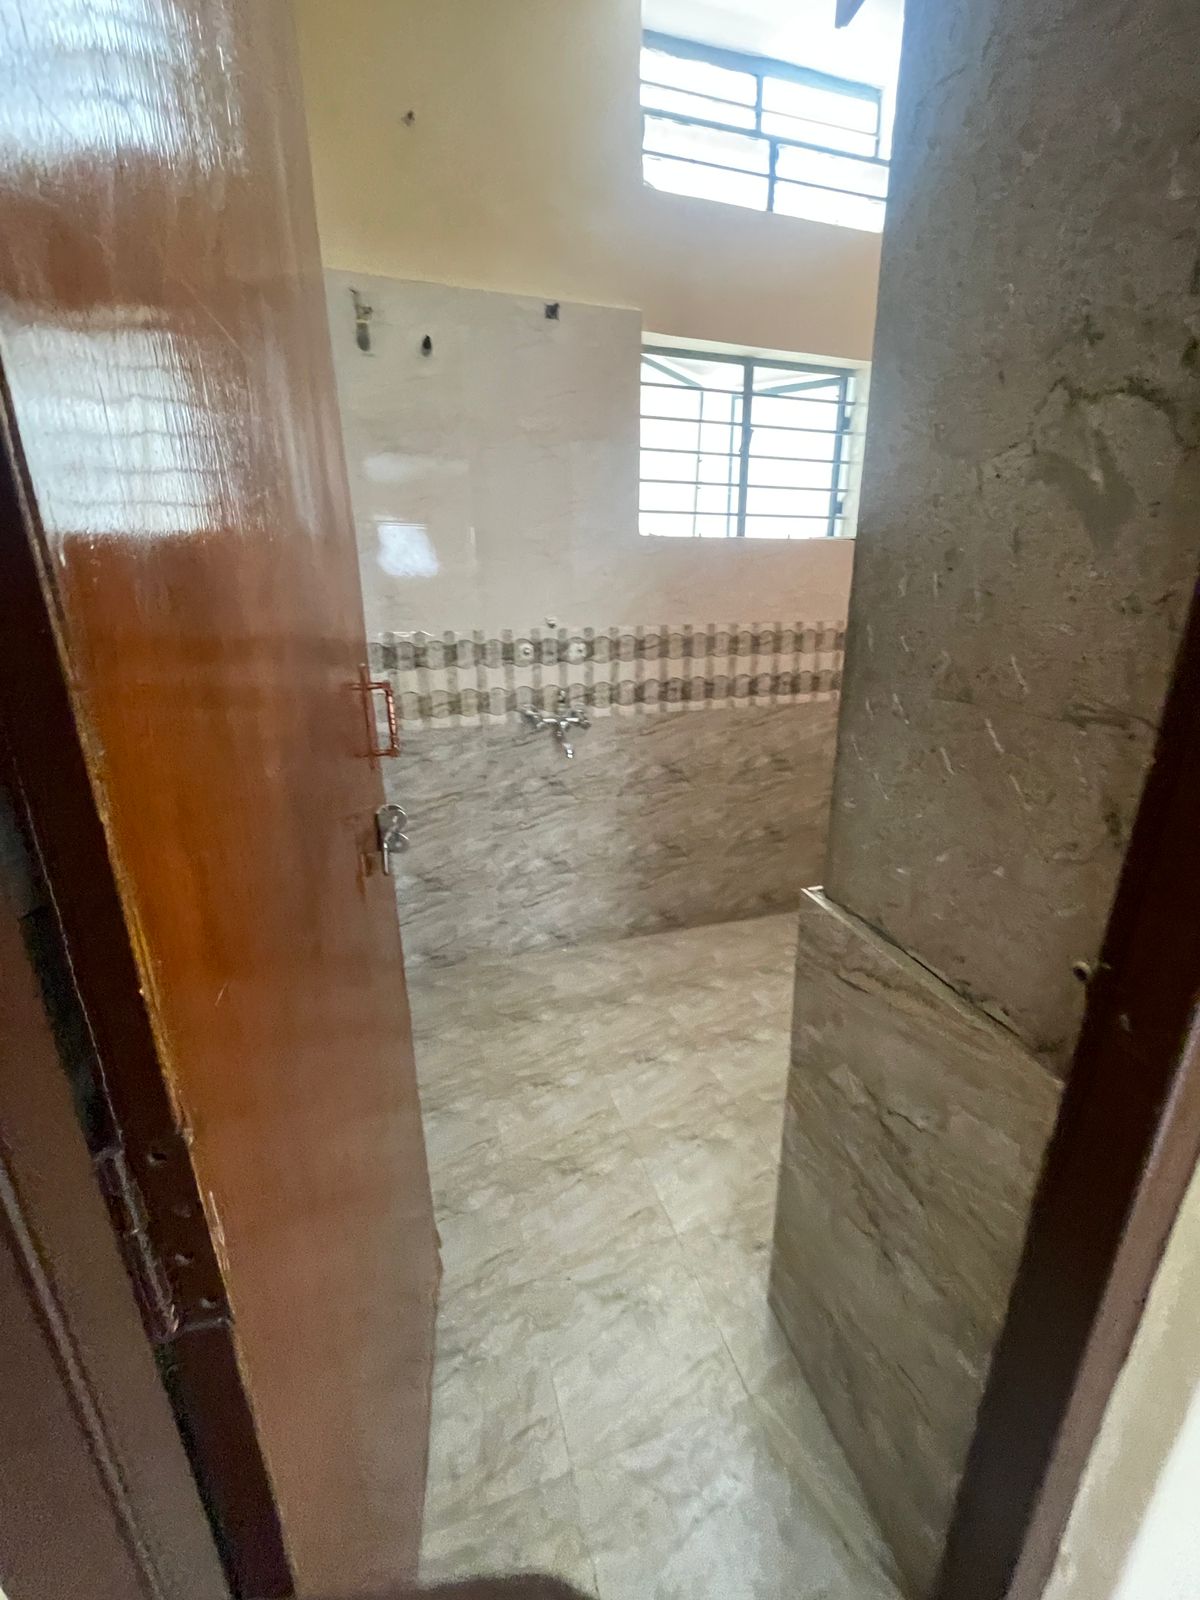 2 BHK Independent House for Lease Only at JAML2 - 3624 - 19 Lakhs in Armane Nagar